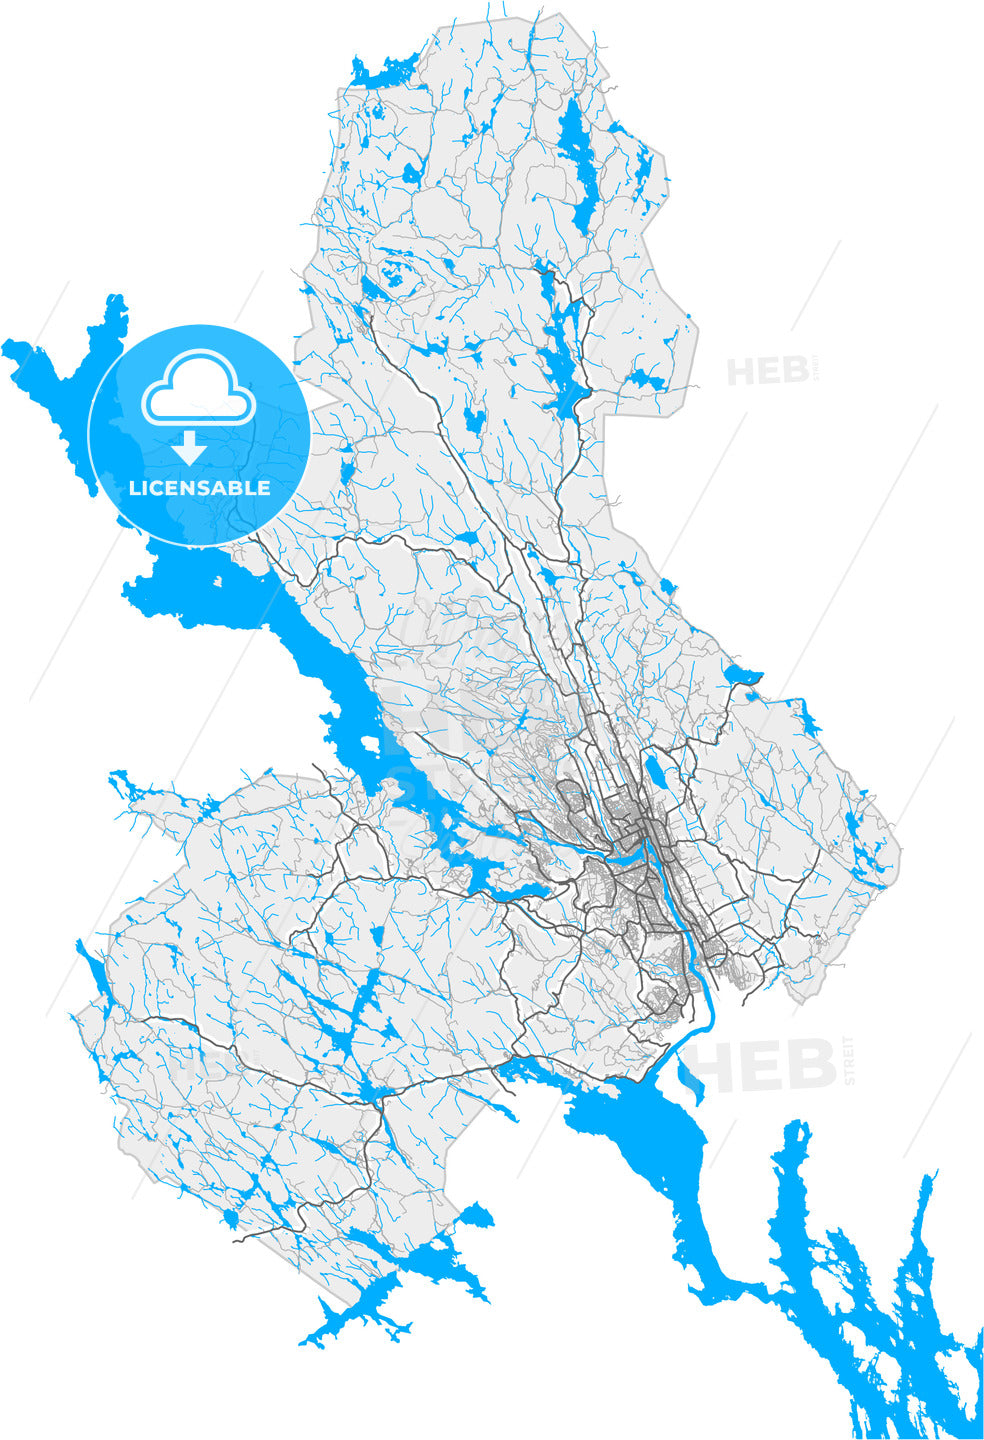 Skien, Telemark, Norway, high quality vector map